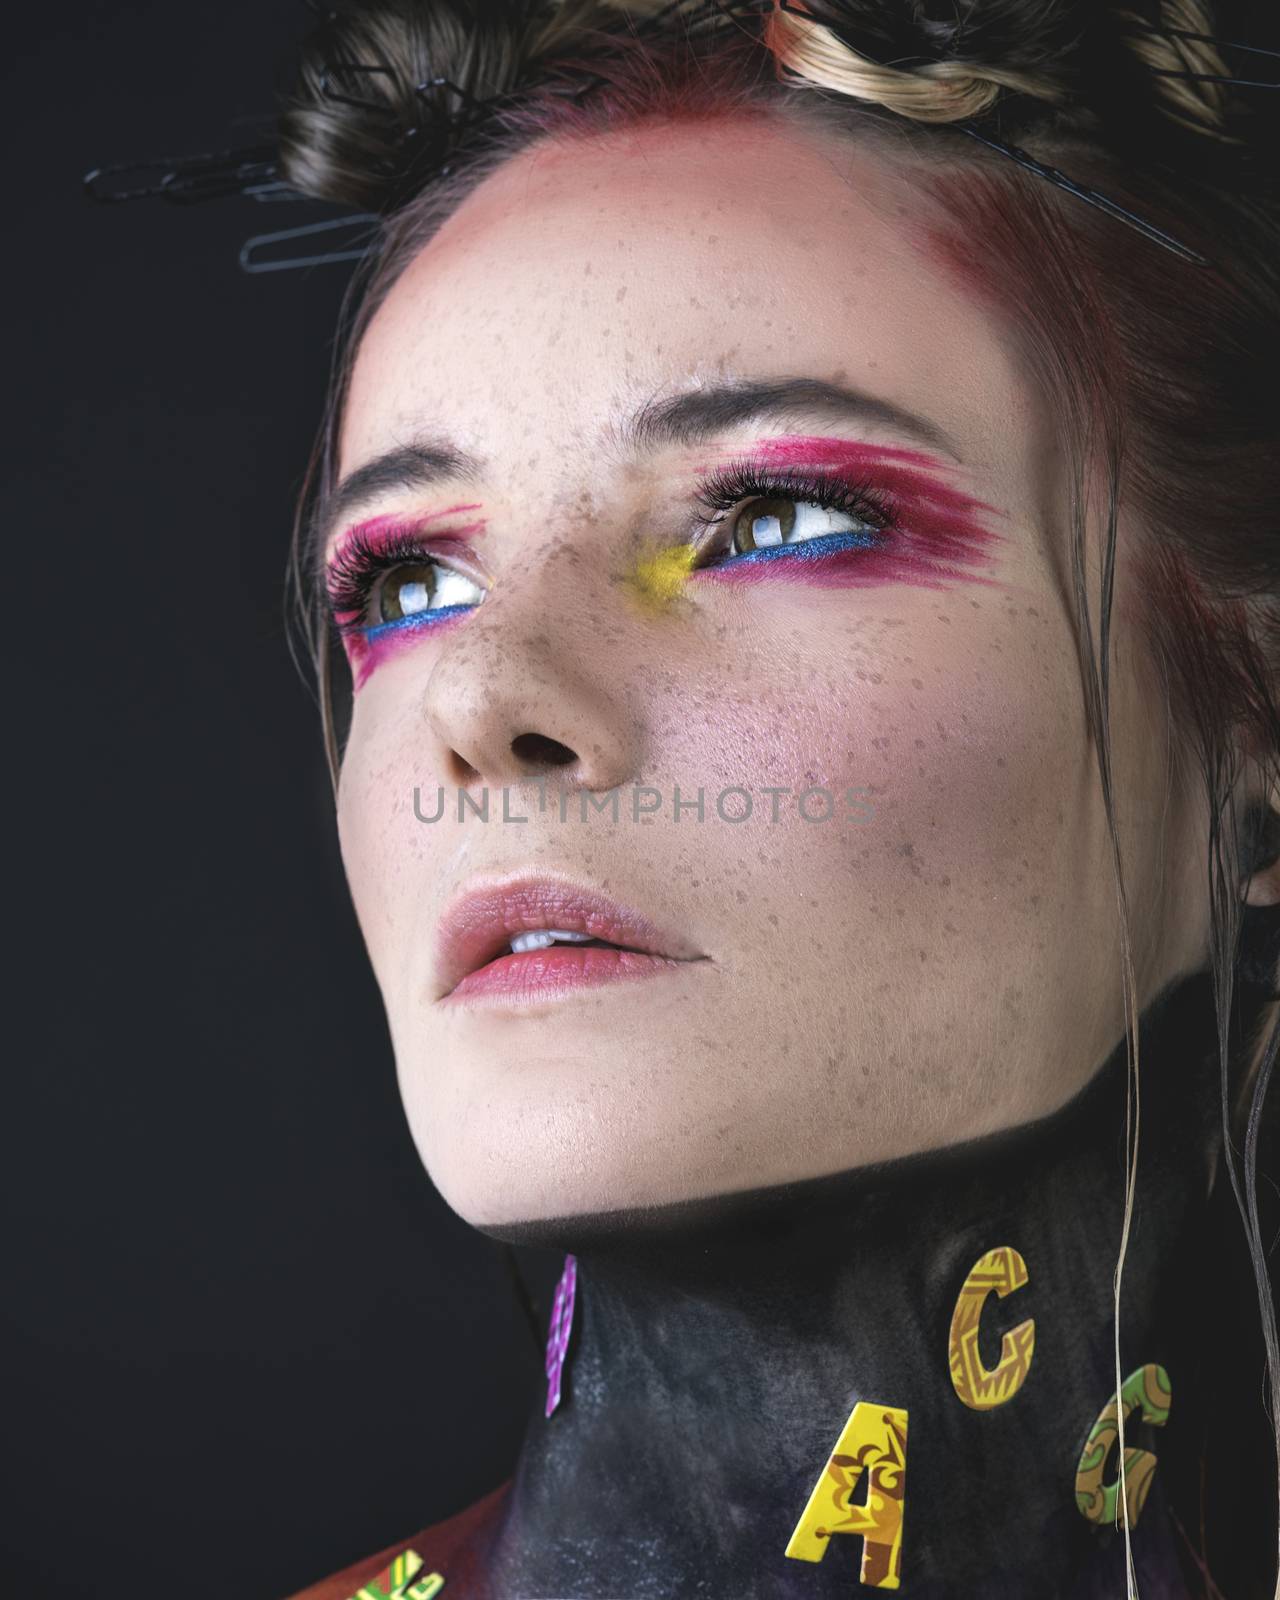 Emotional portrait of a young girl with creative makeup and colorful letters on her shoulders